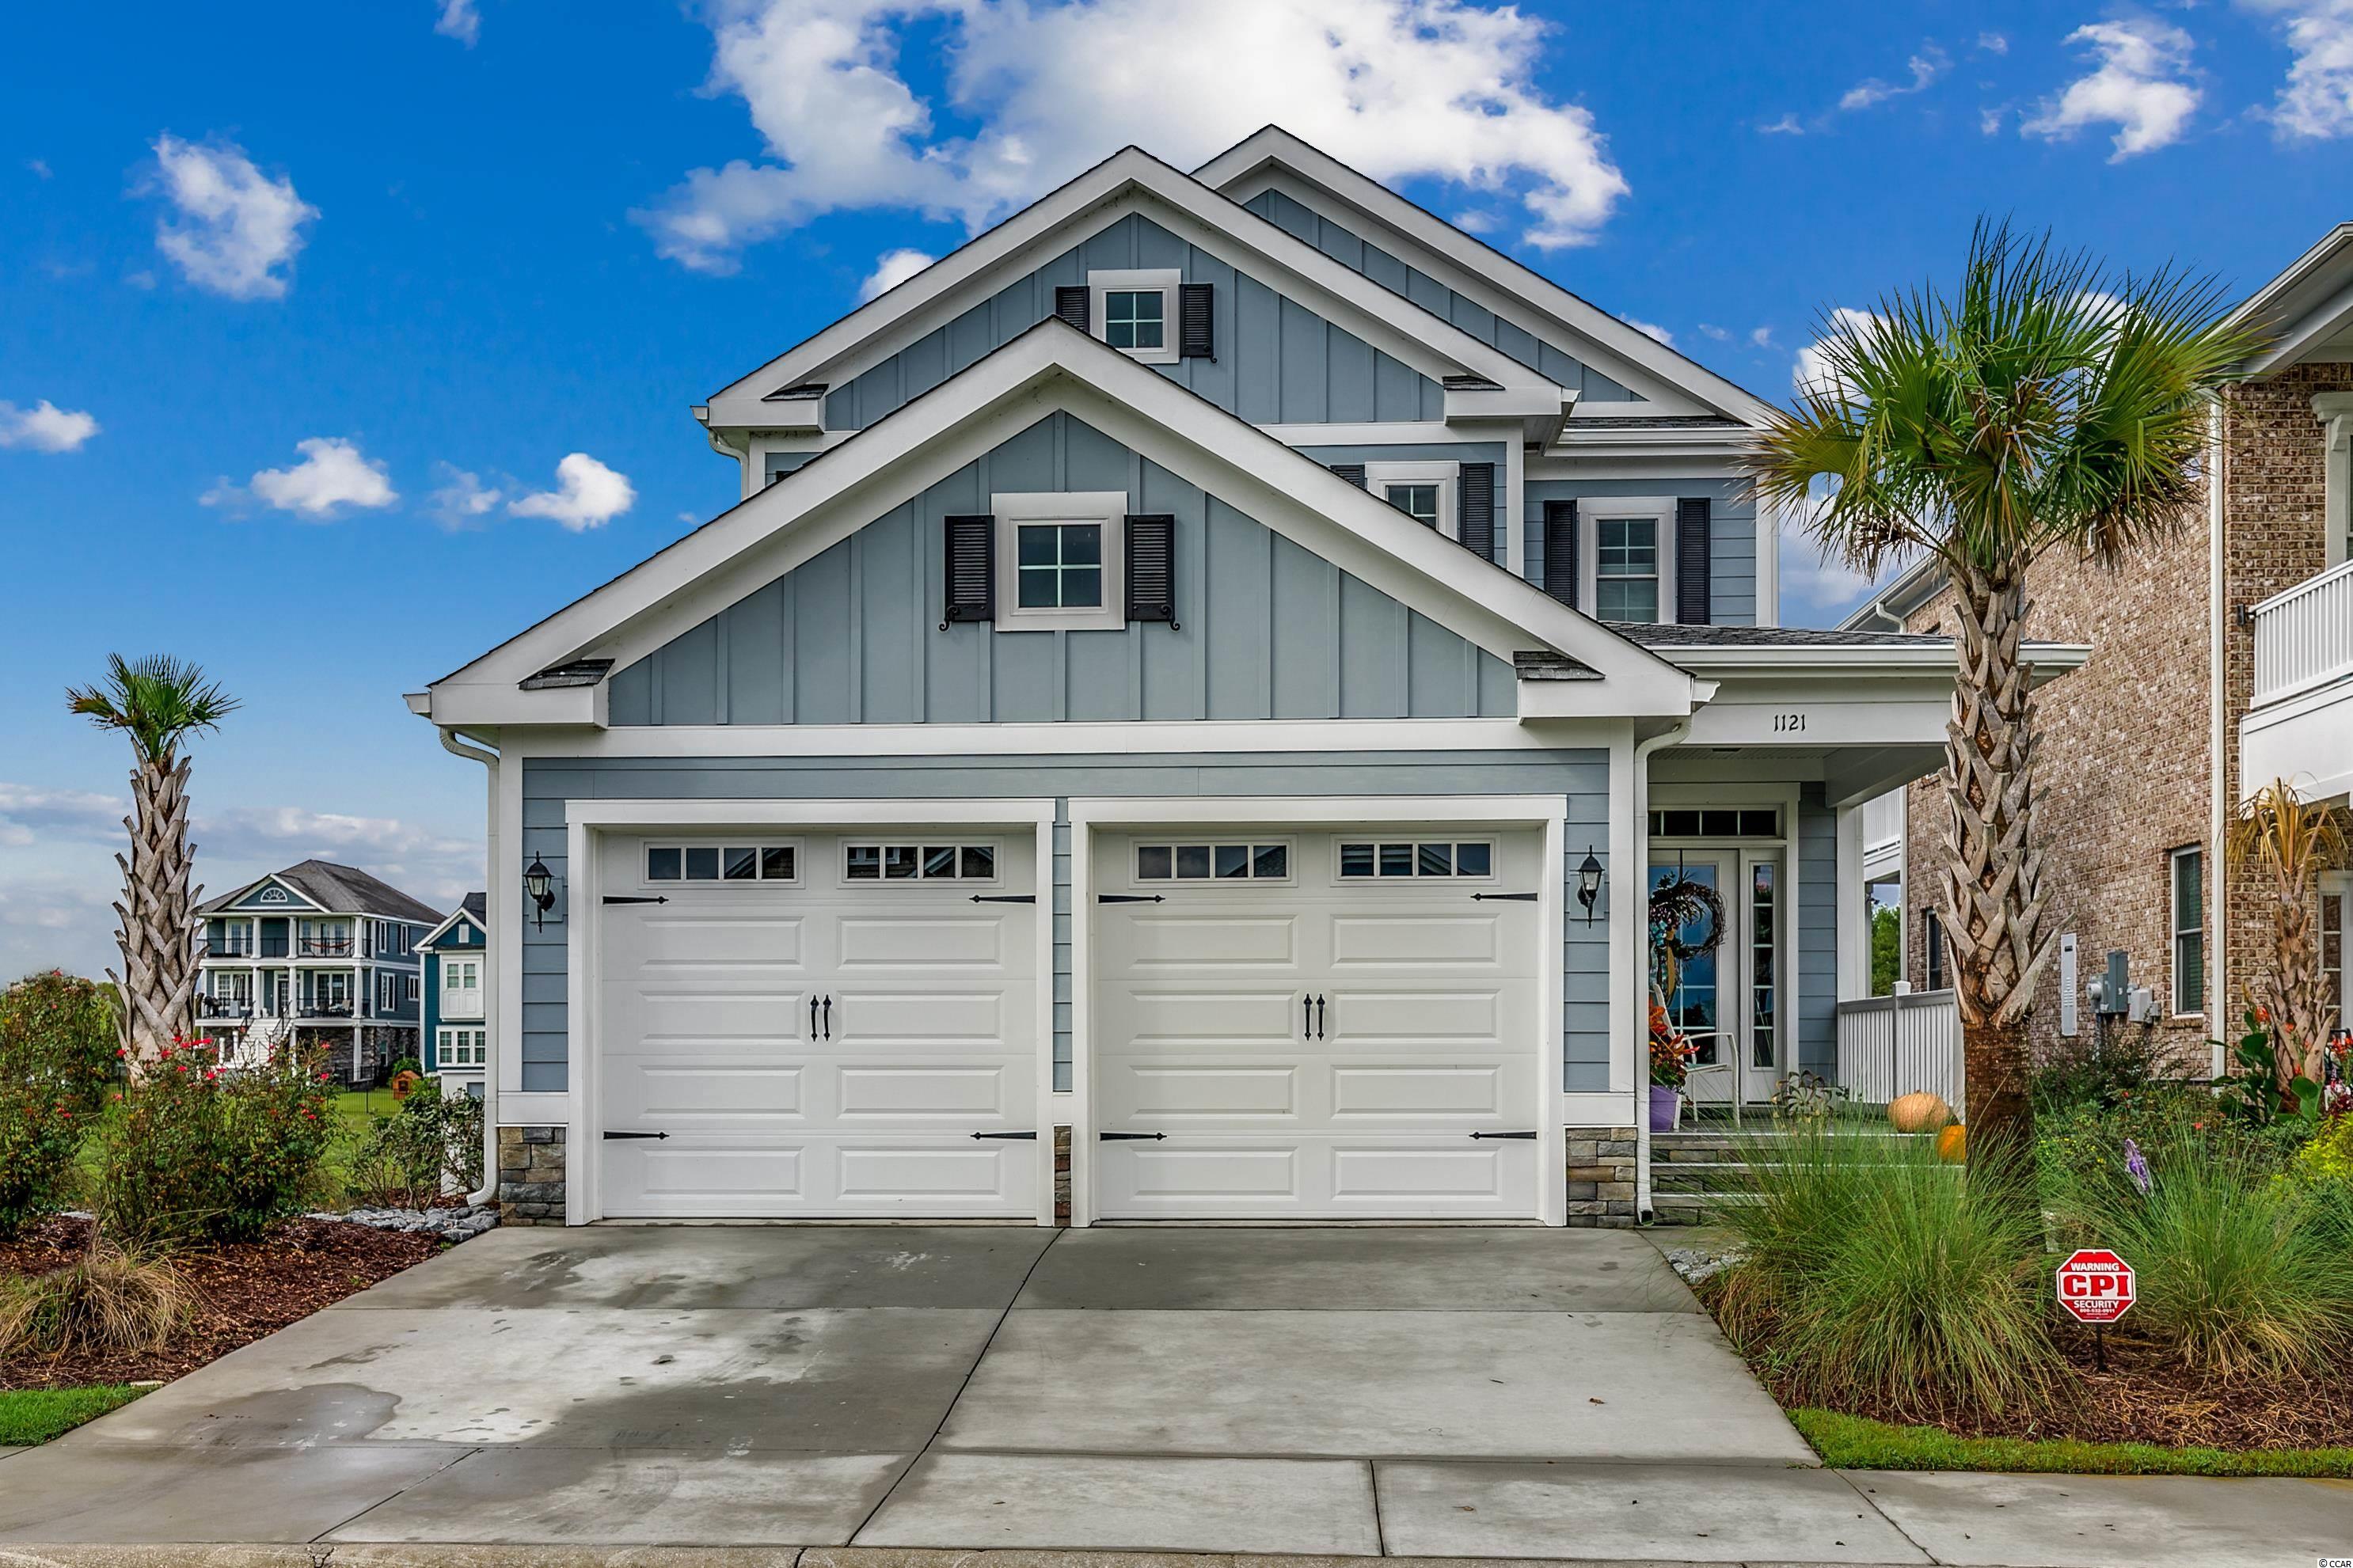 1121 Whispering Winds Dr. Myrtle Beach, SC 29579